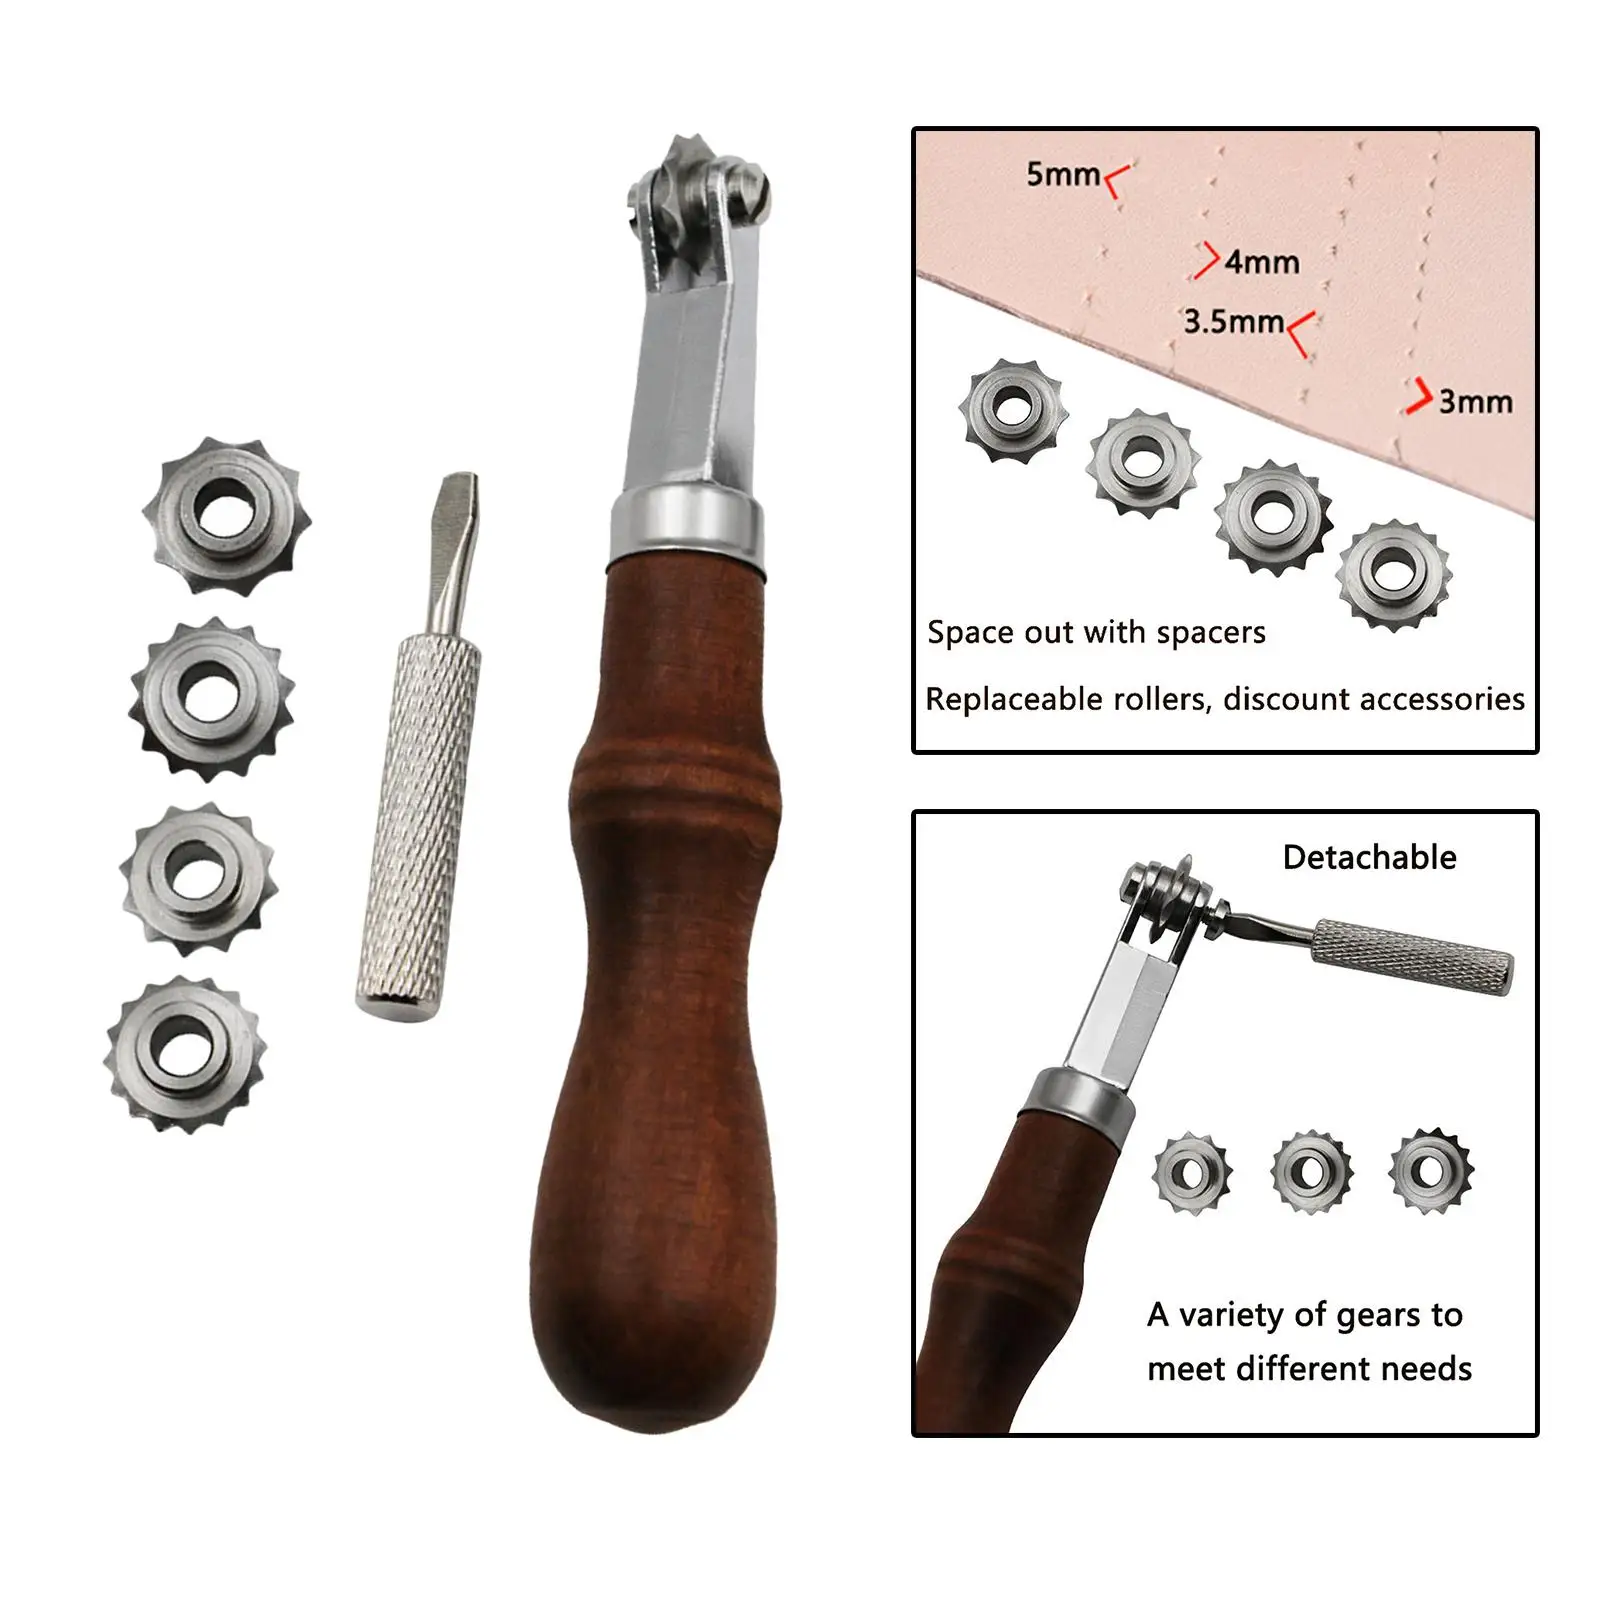 Stainless Steel Tracing Wheel and 4 Gears Rotary Perforator with Wooden Handle for Dressmaking Crafts Paper Cross Stitch Leather